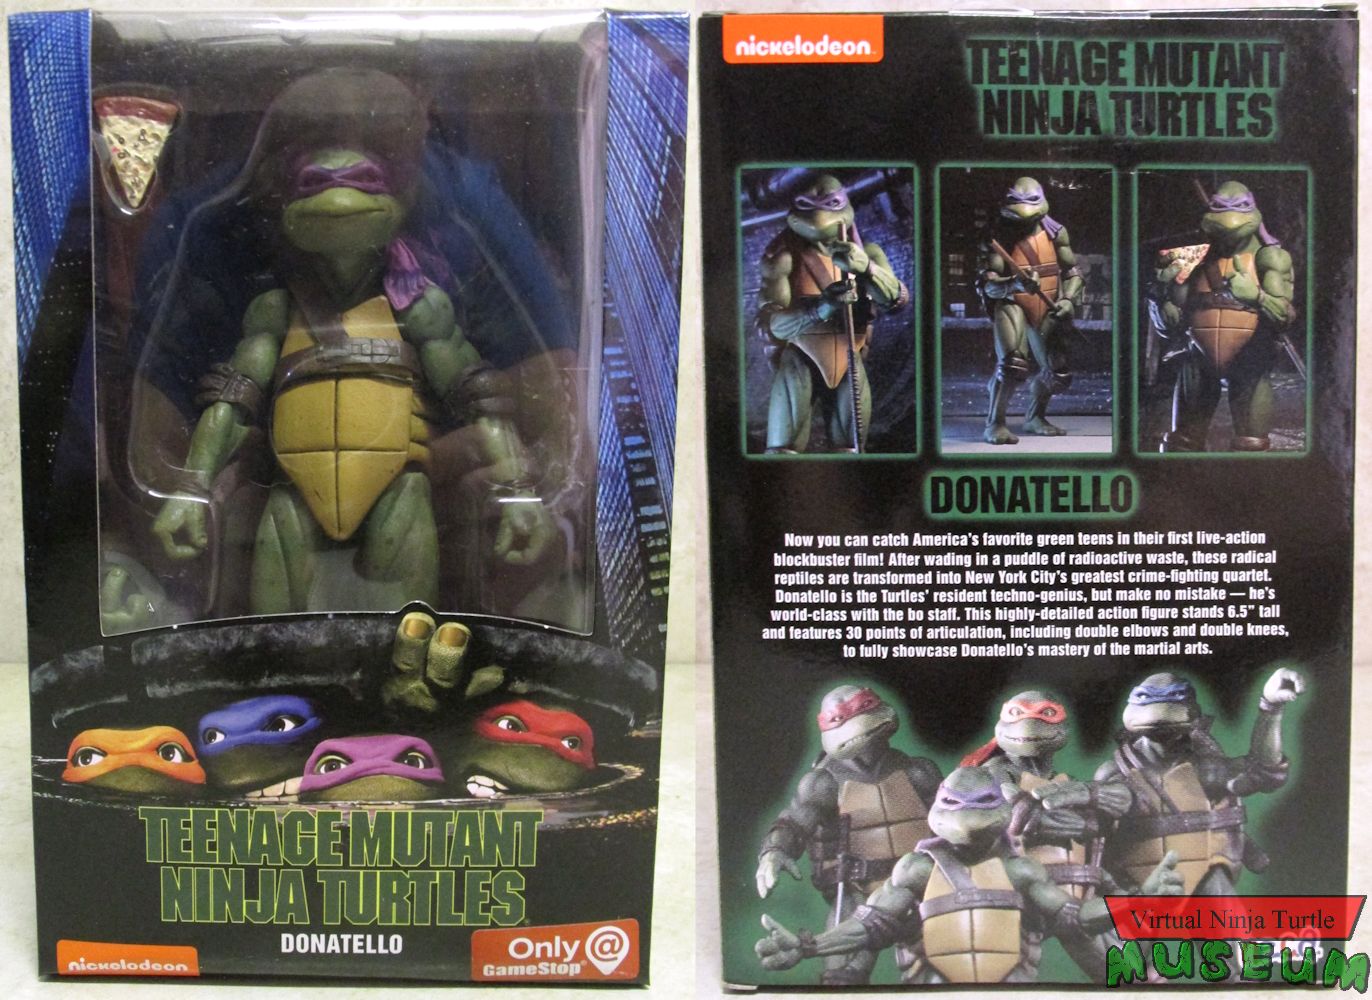 Gamestop box front and back